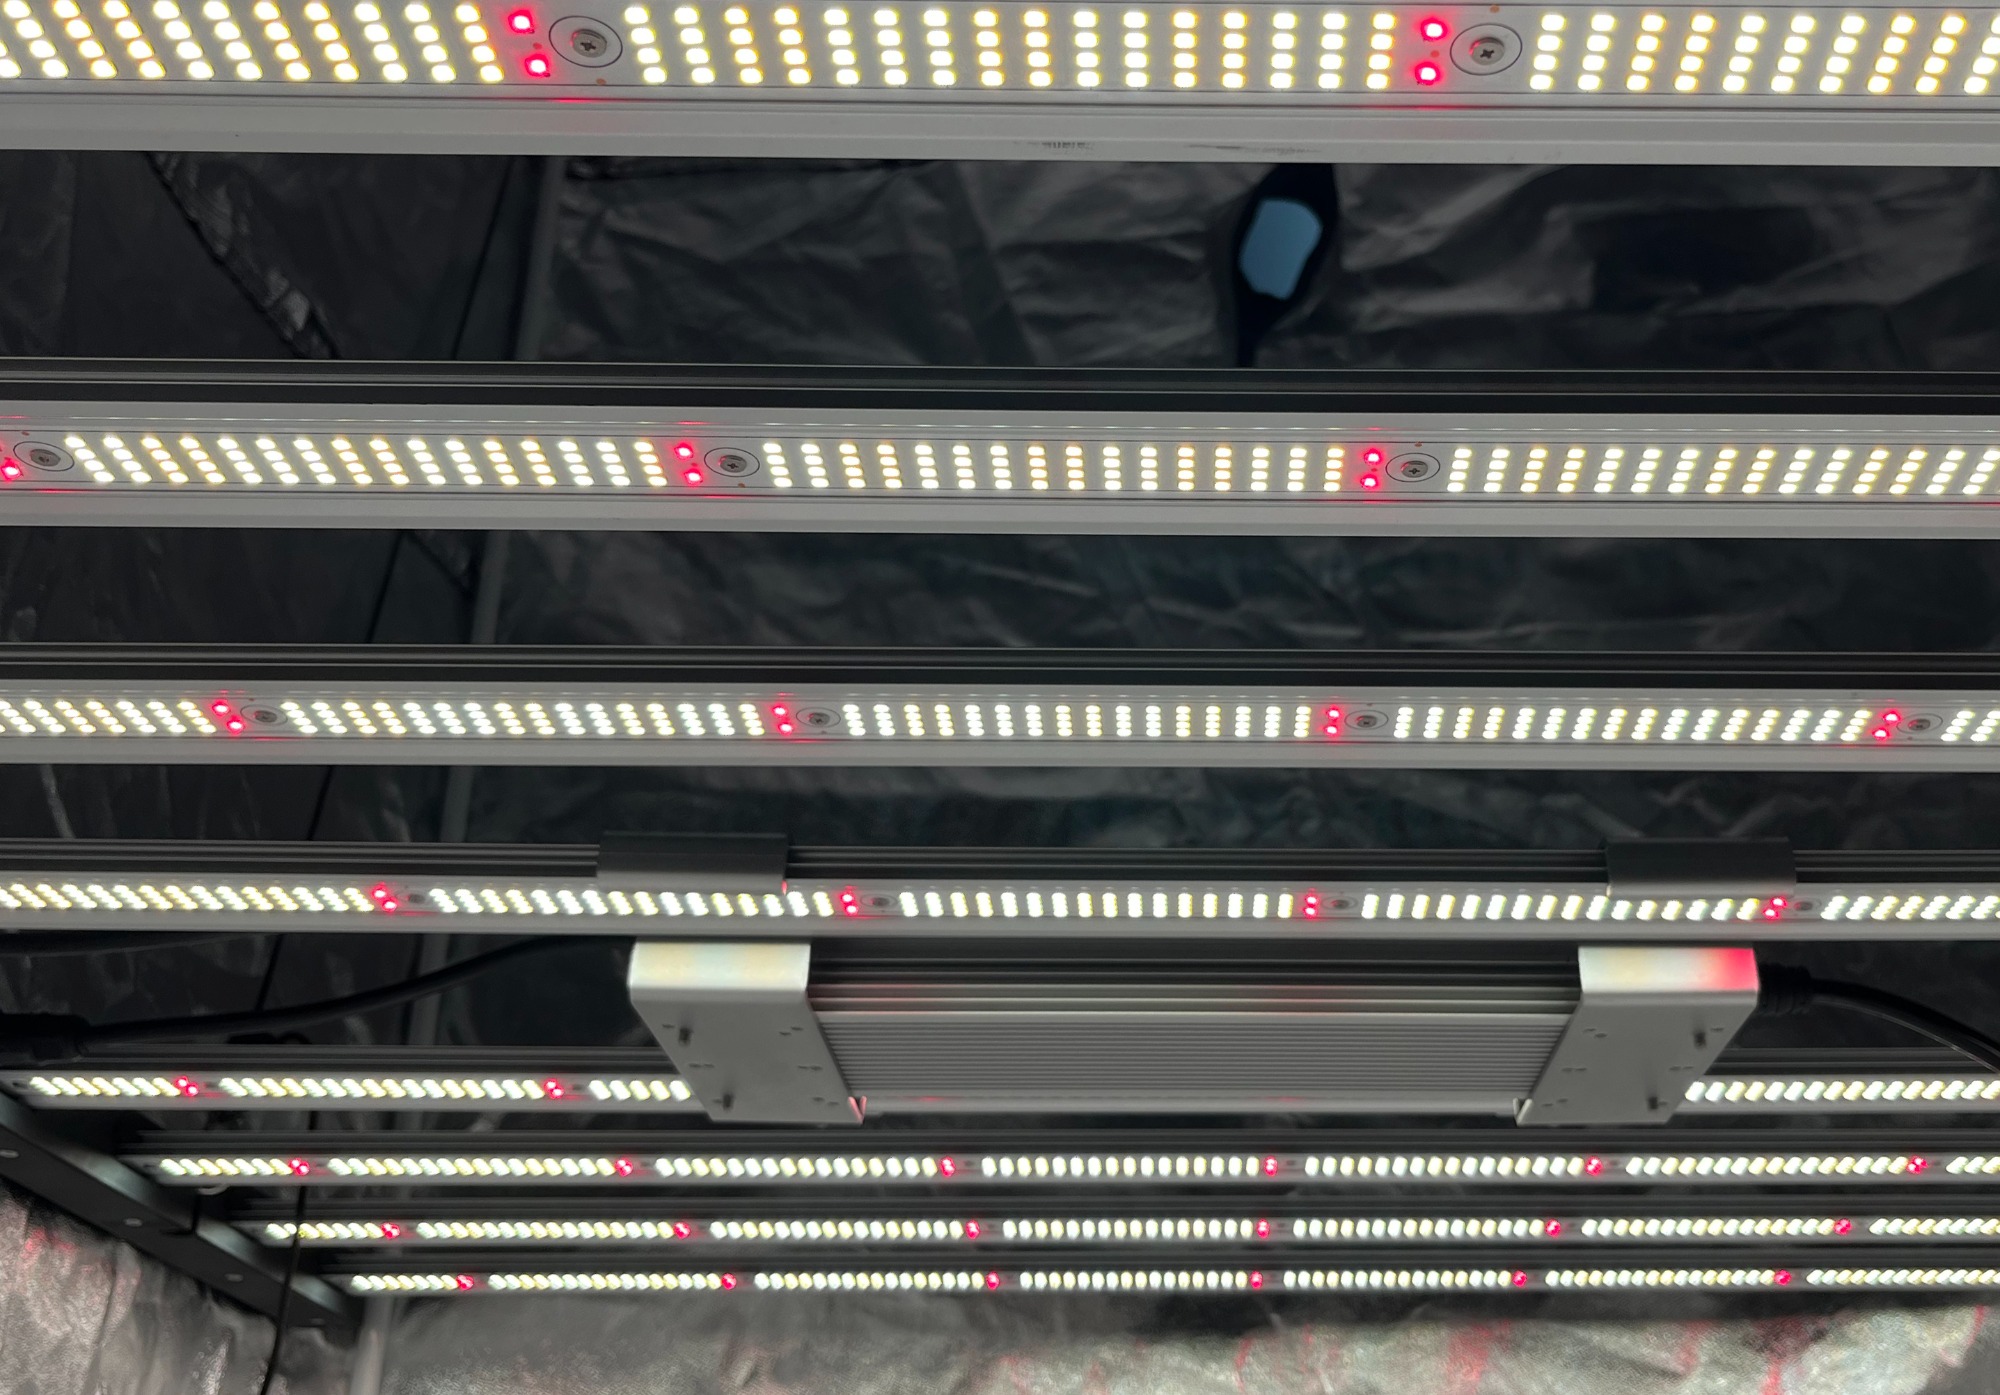 How to distinguish between good and bad LED grow lights